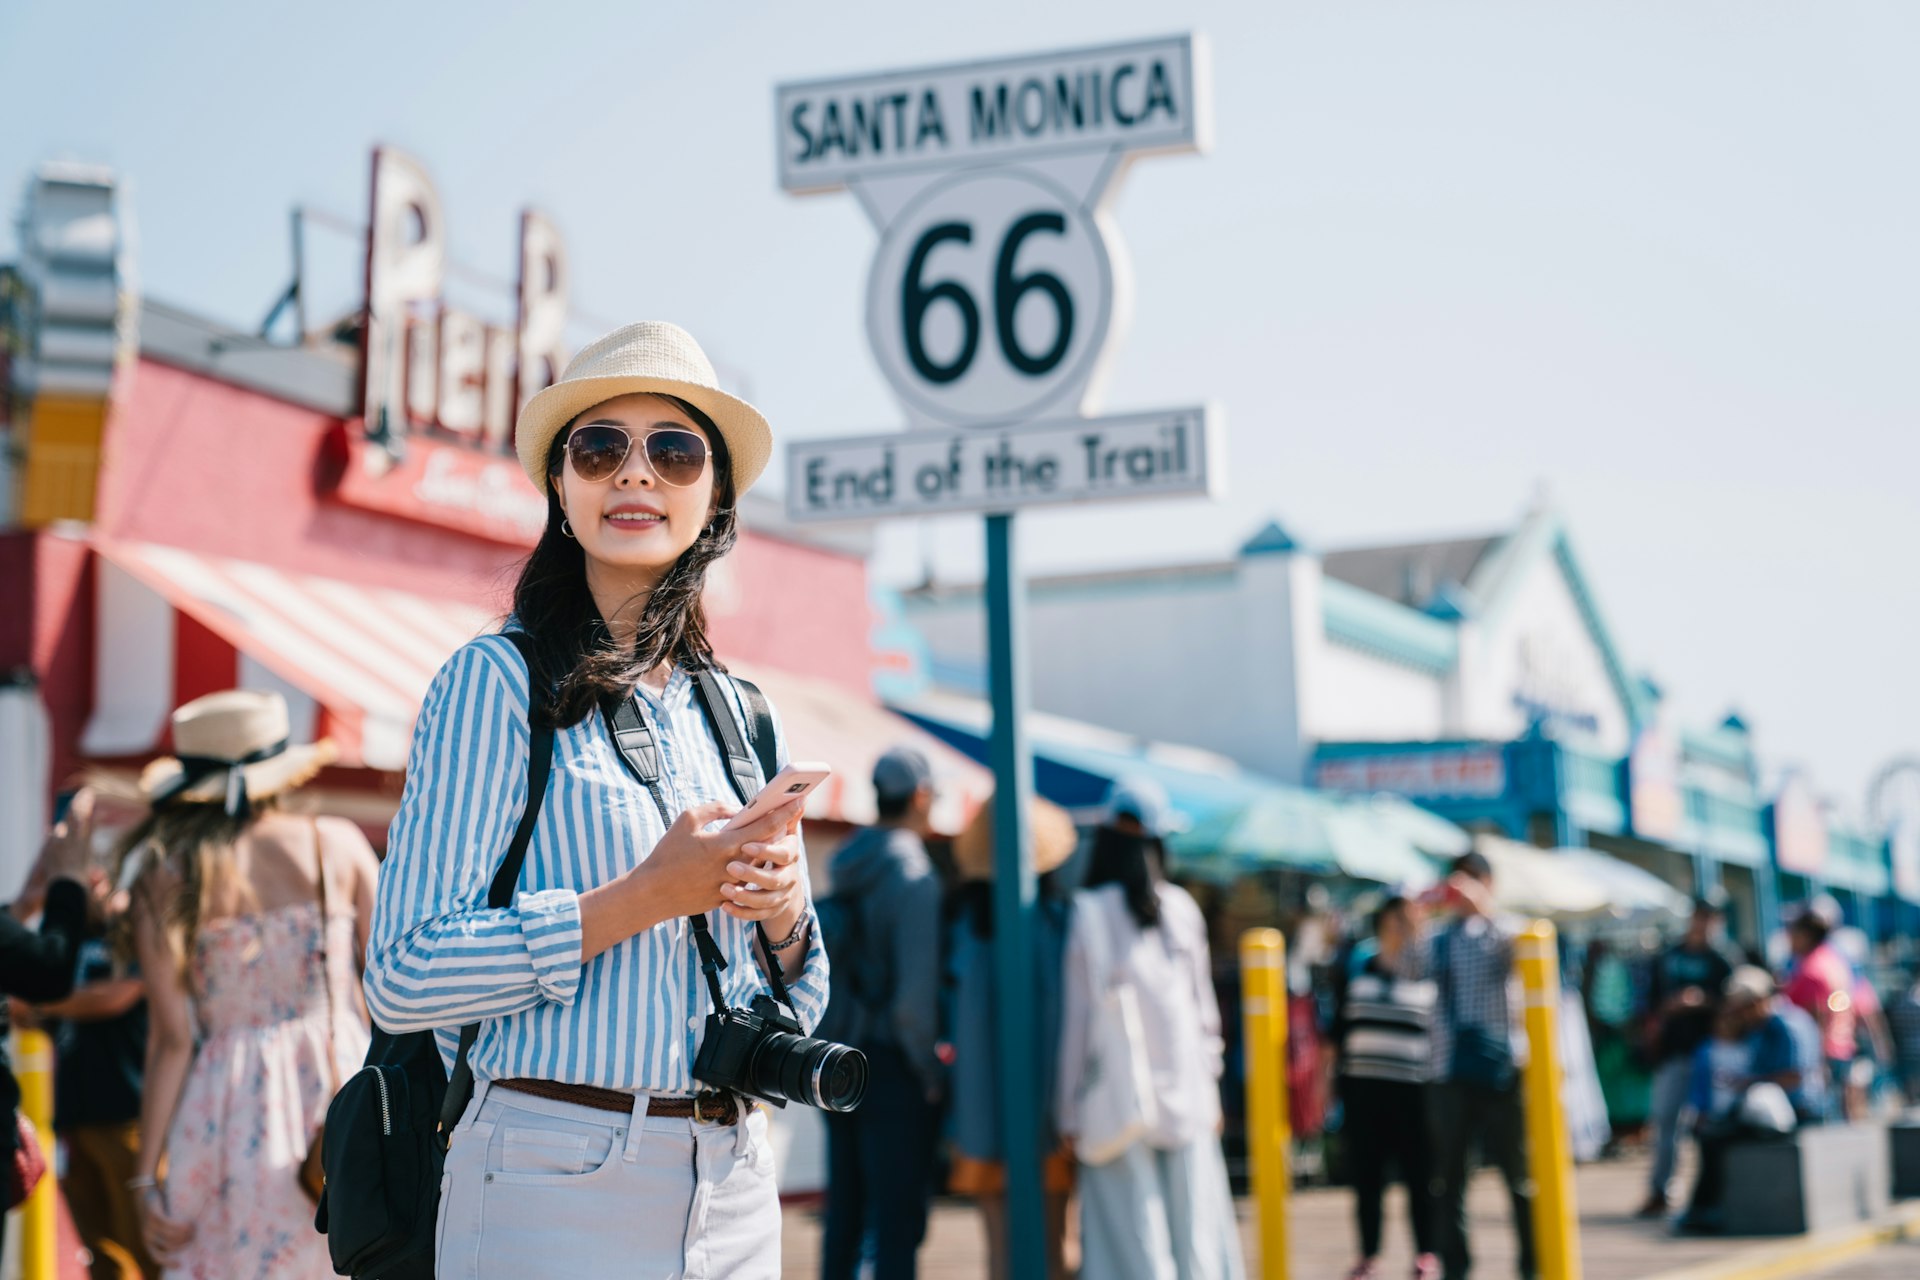 A woman stands on the pier in Santa Monica near a large sign marking the end of Route 66